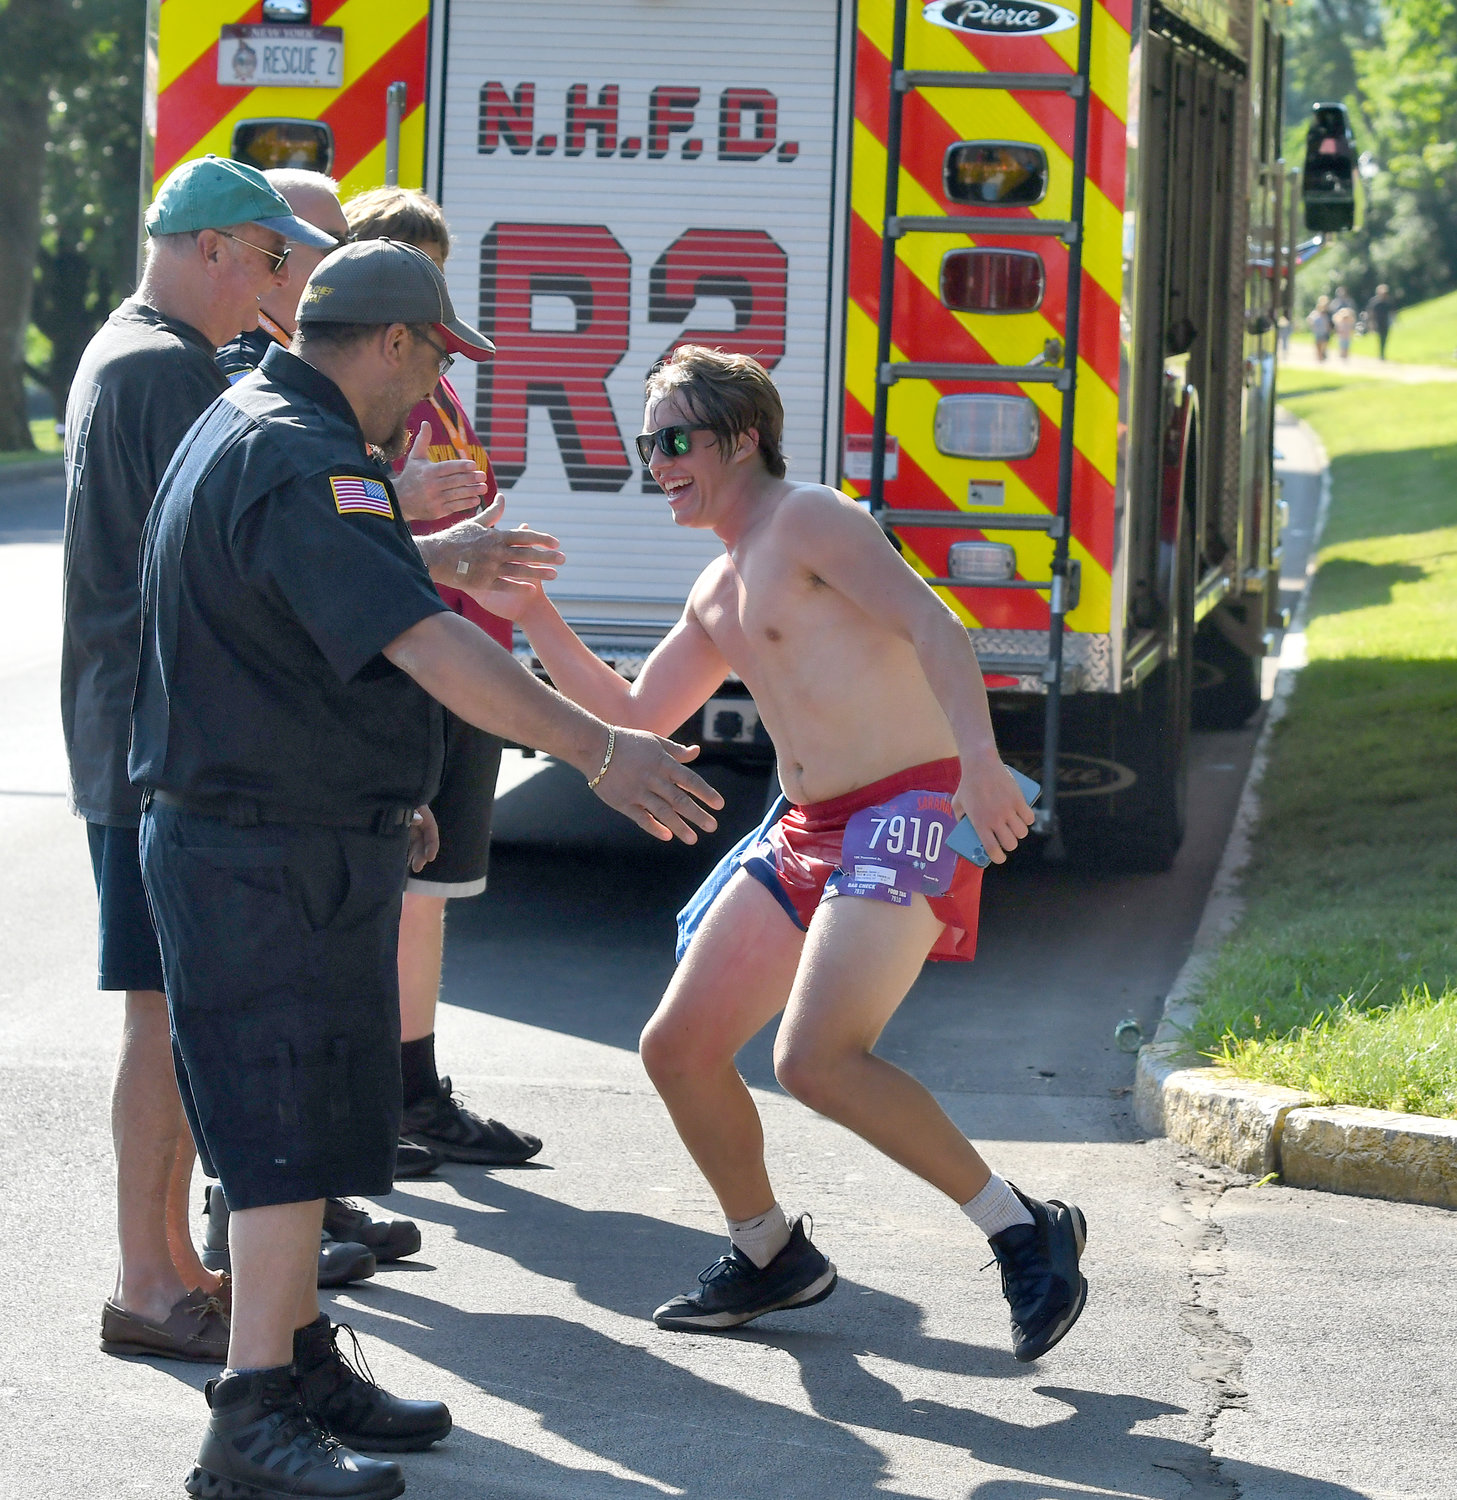 Daniel Monahan of New Hartford celebrates with New Hartford firemen after coming down Master Garden Road onto Memorial Parkway during the 45th Boilermaker 15K Road Race Sunday.